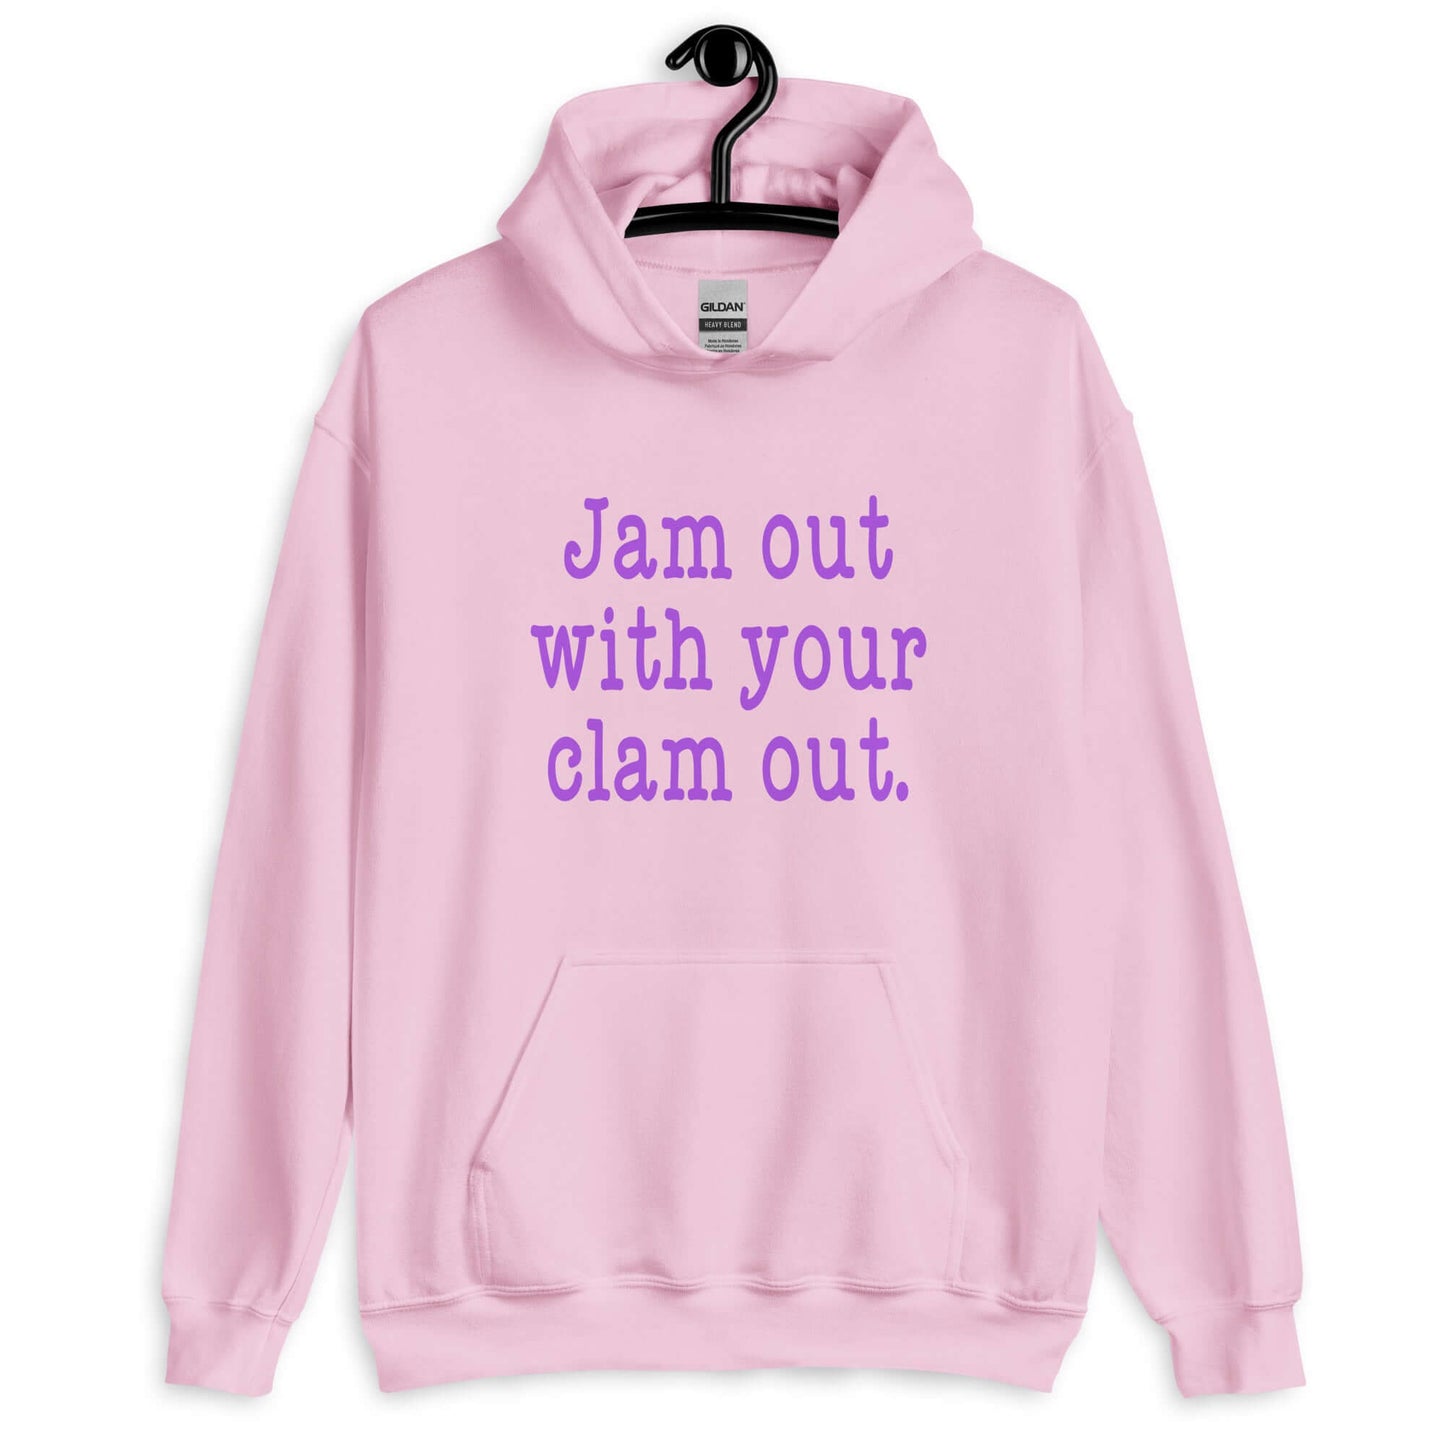 Light pink hoodie sweatshirt with the phrase Jam out with your clam out printed on the front in purple.